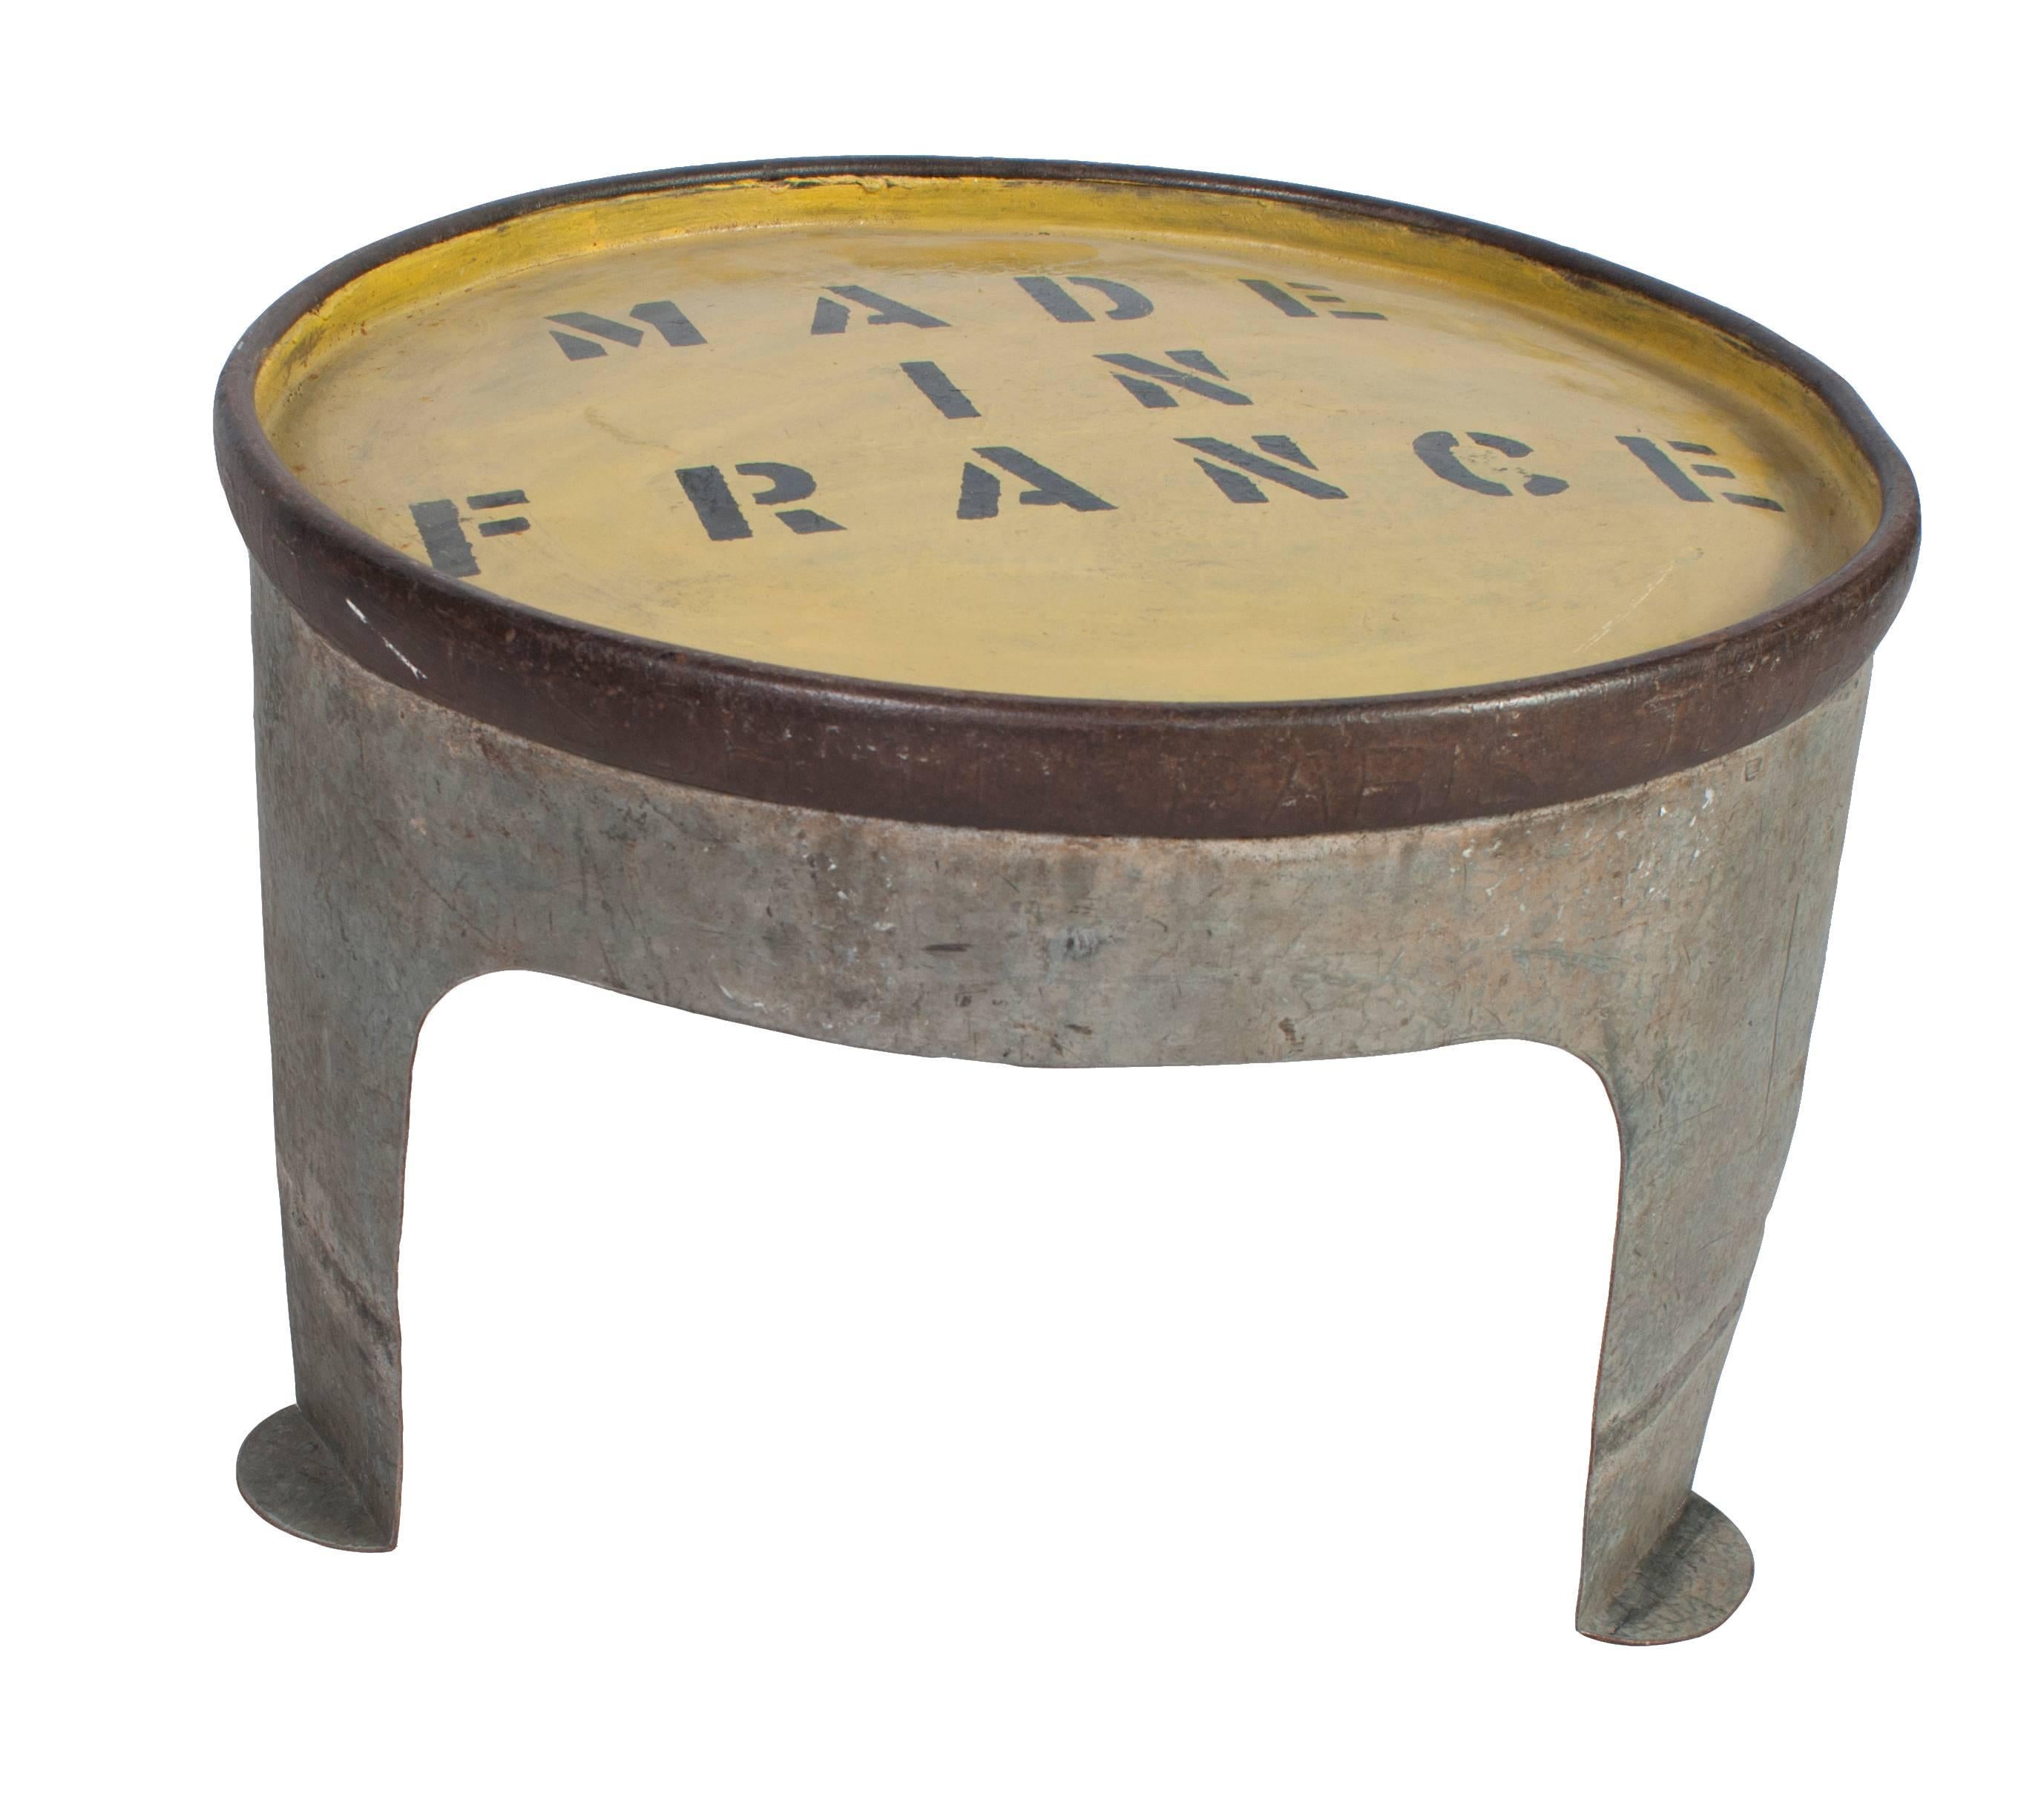 Great heavy duty round coffee table with a hand-painted yellow top.